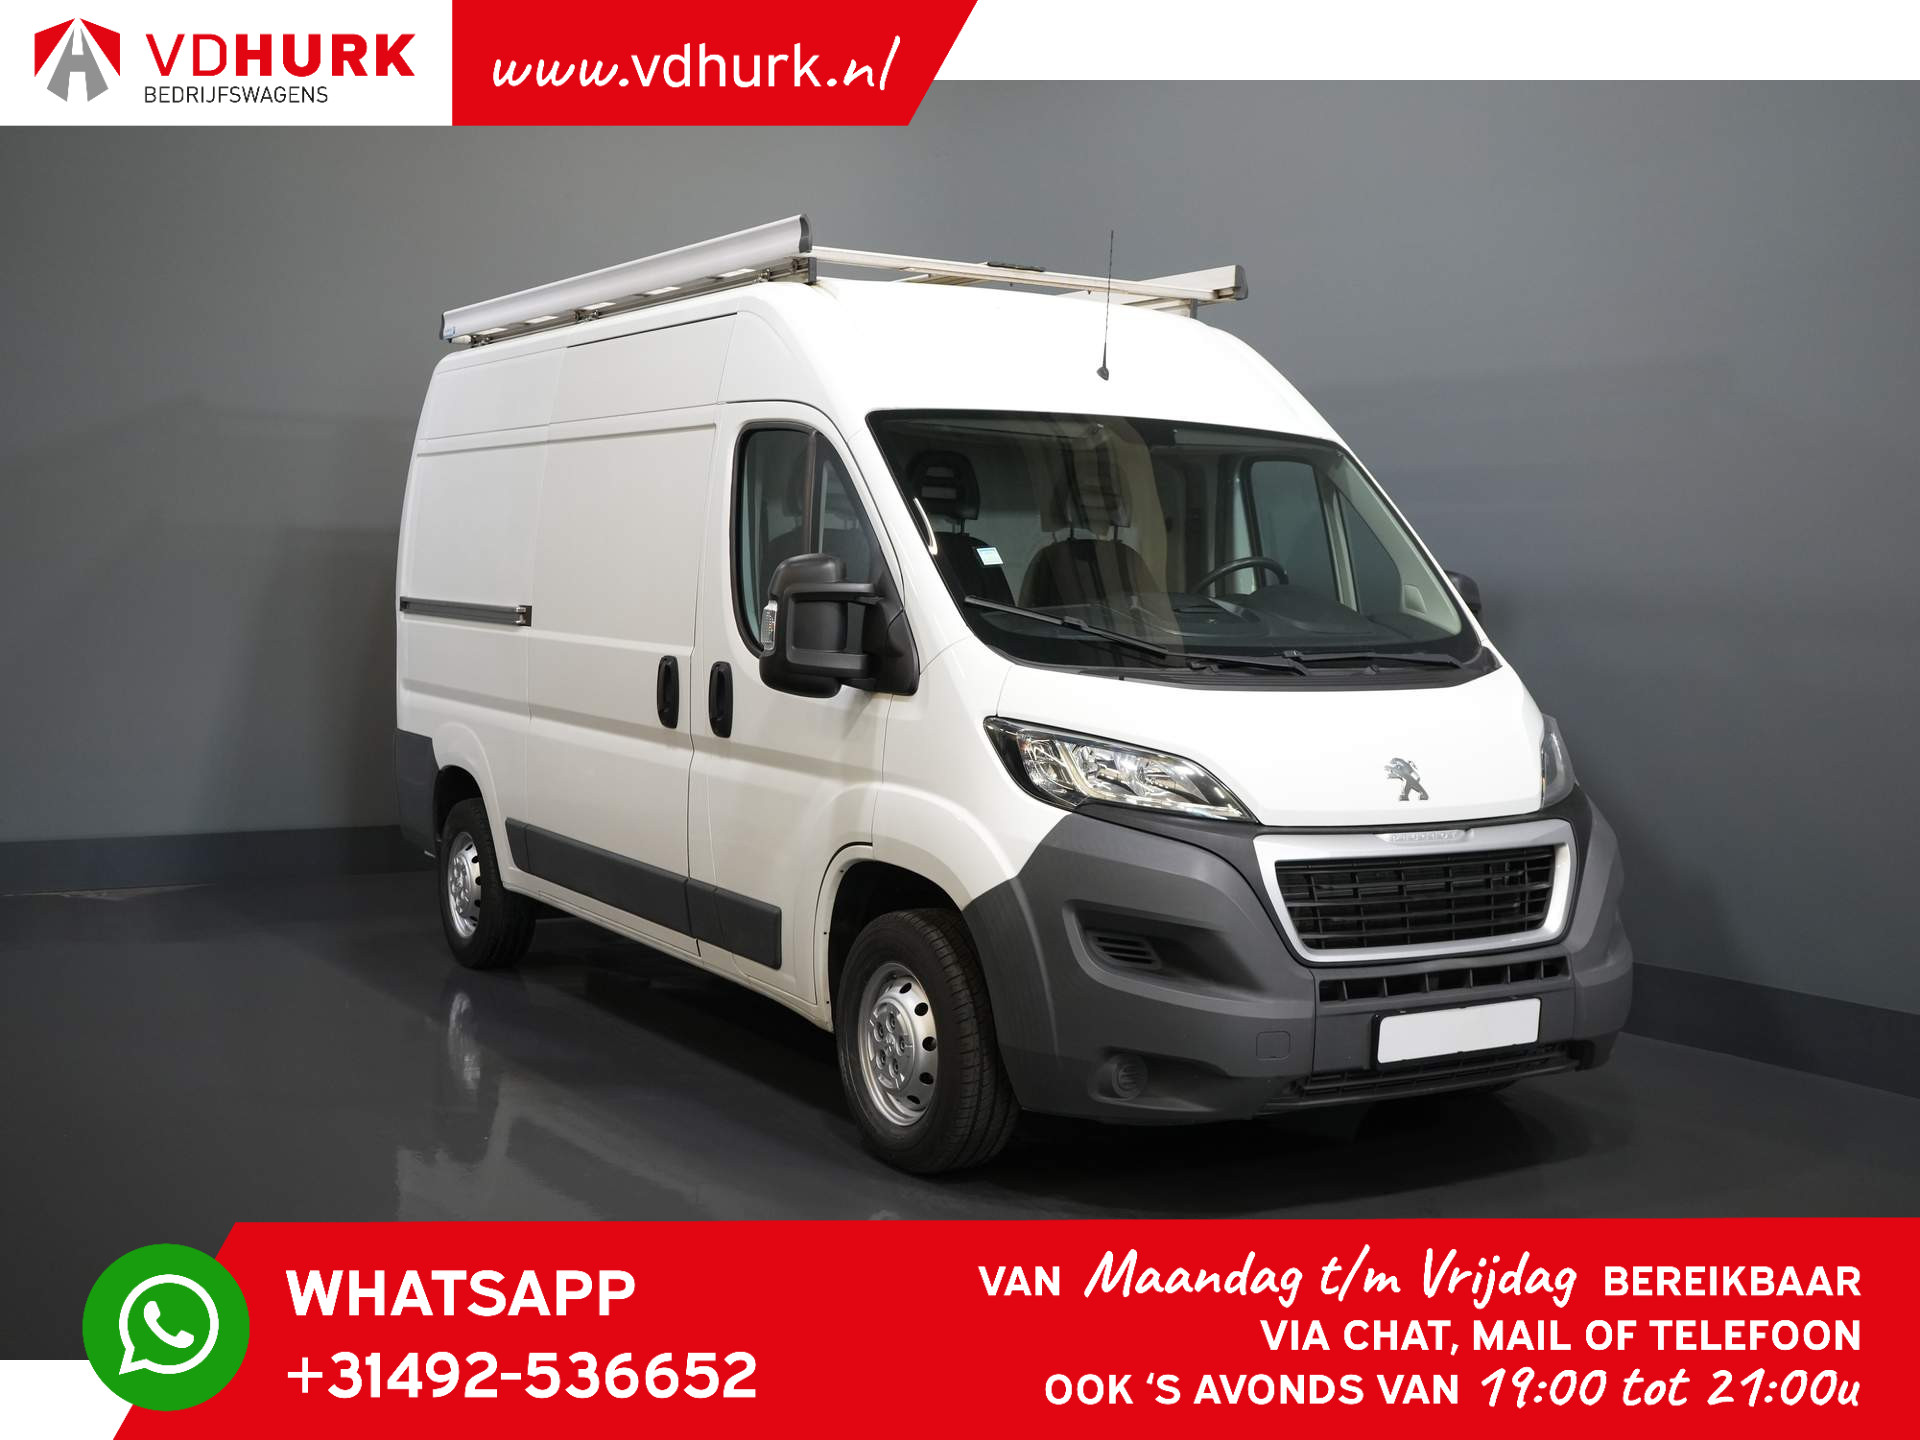 Peugeot Boxer 2.0 HDI EU6 L2H2 Imperiaal+Trap/ Inrichting/ Cruise/ Trekhaak/ Airco